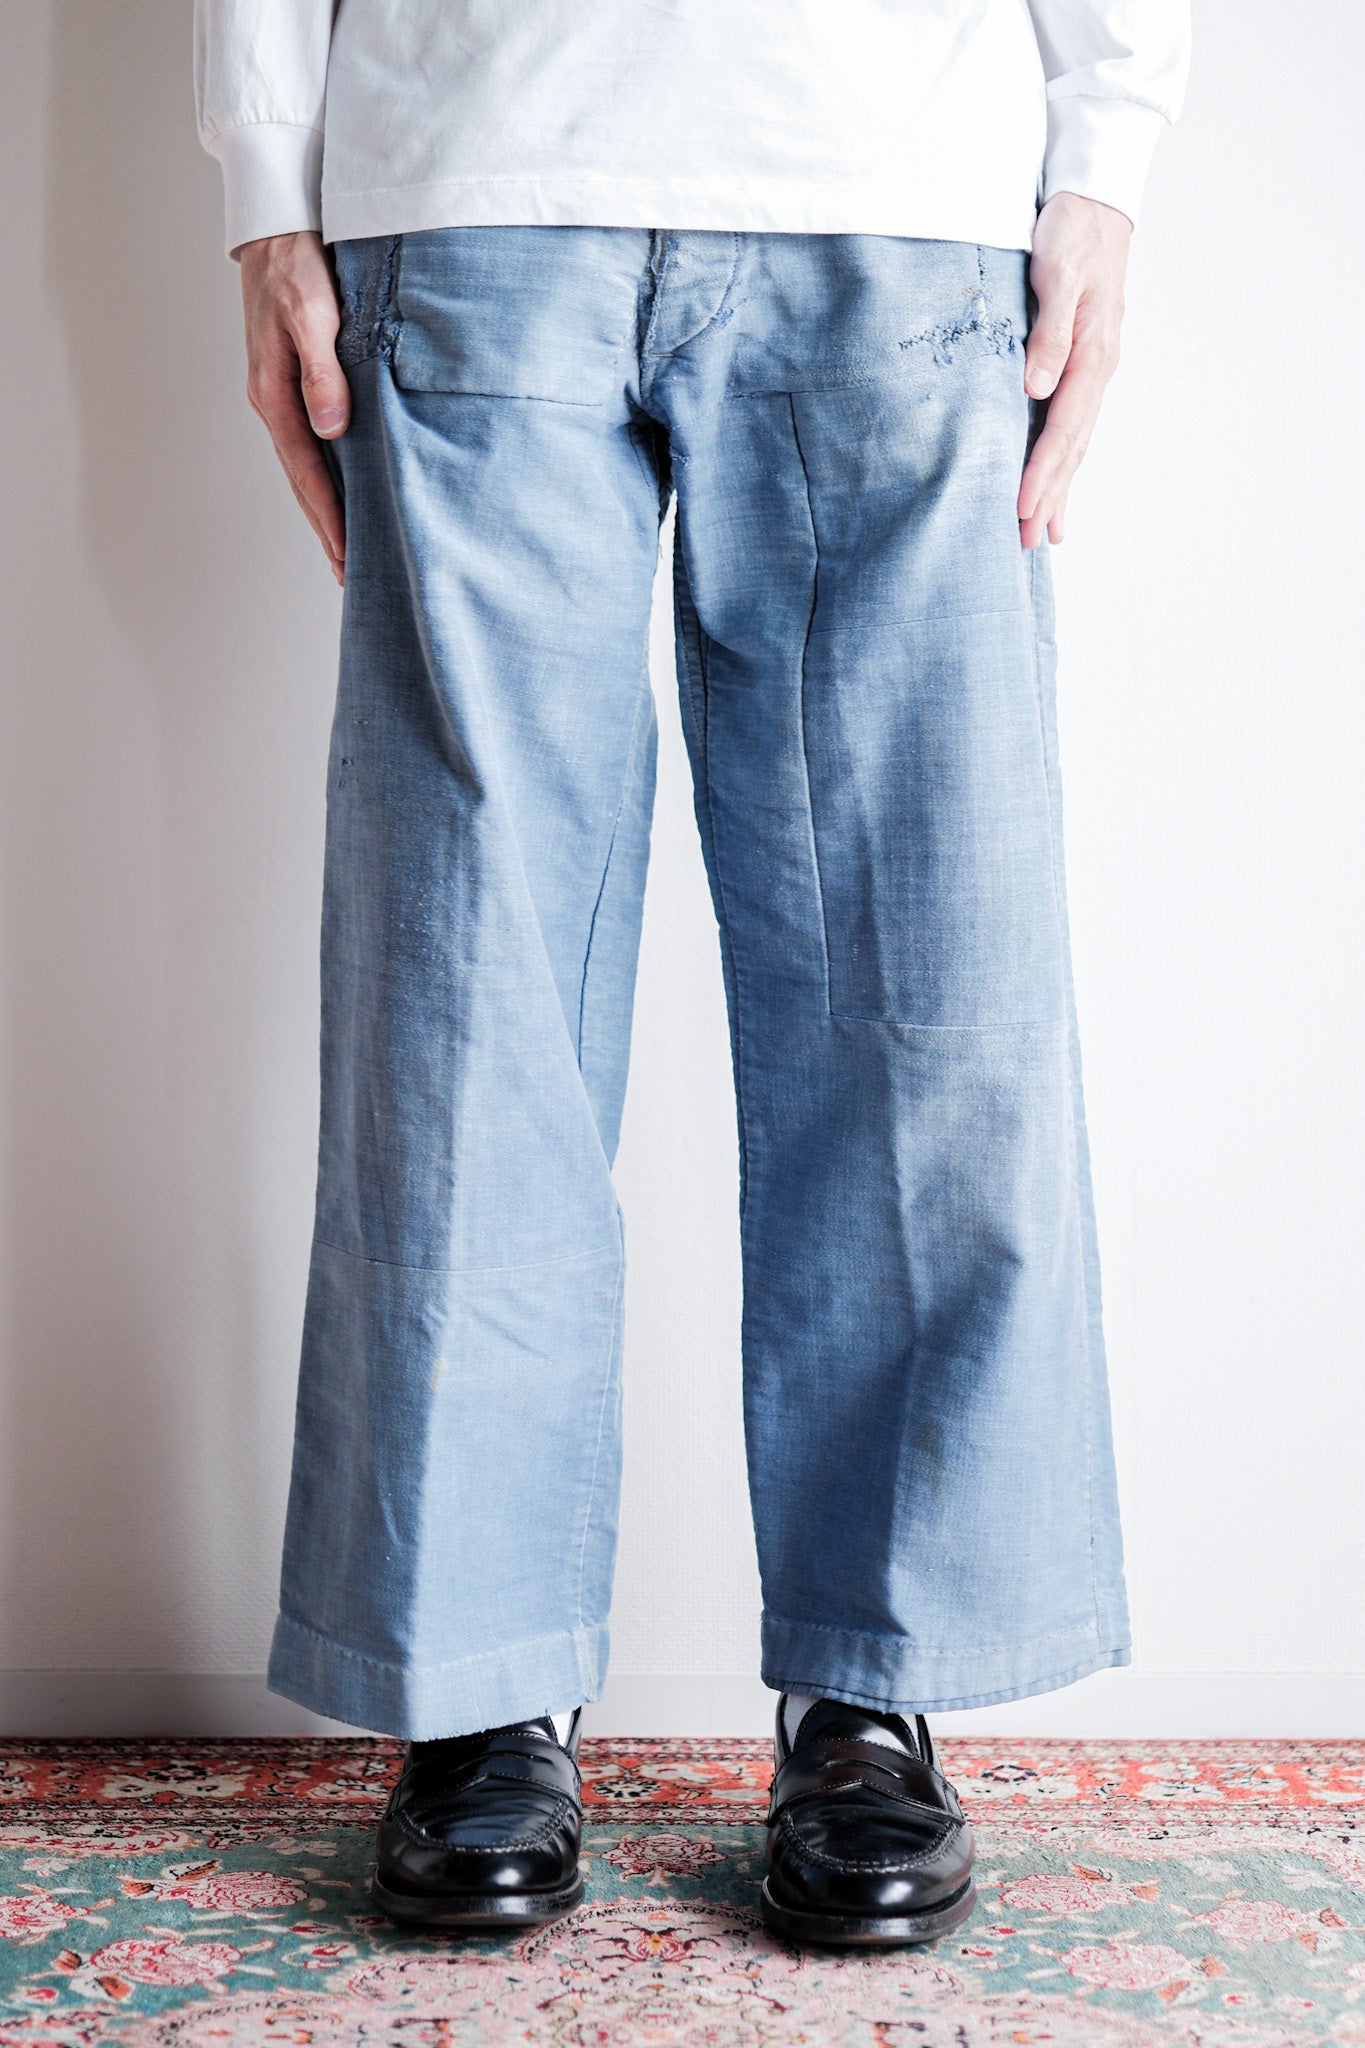 french corduroy trousers ※サスペンダー付属 - tracemed.com.br